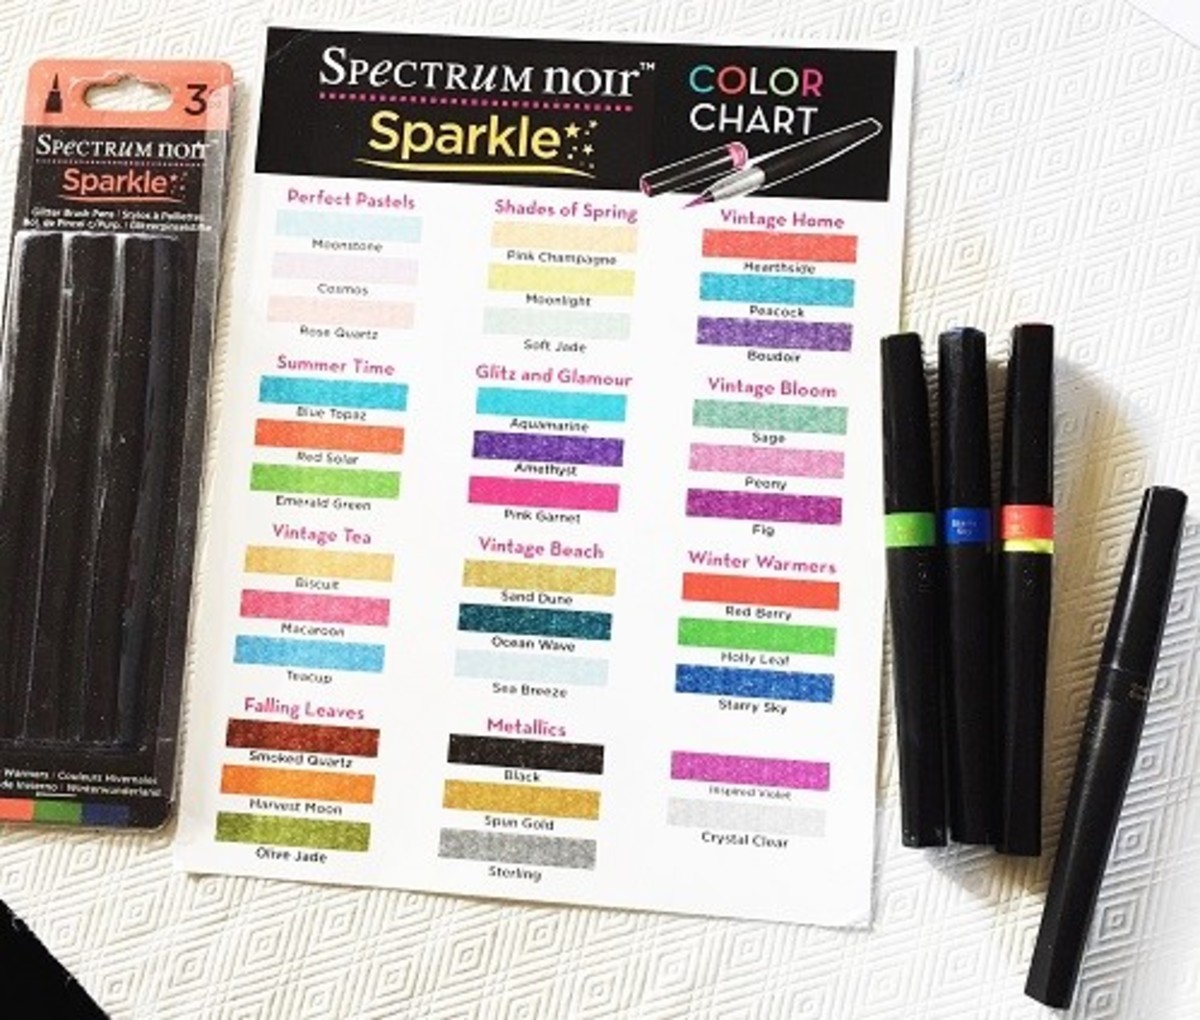 THis chart shows the amazing colors of the Spectrum Noir Glitter Pens